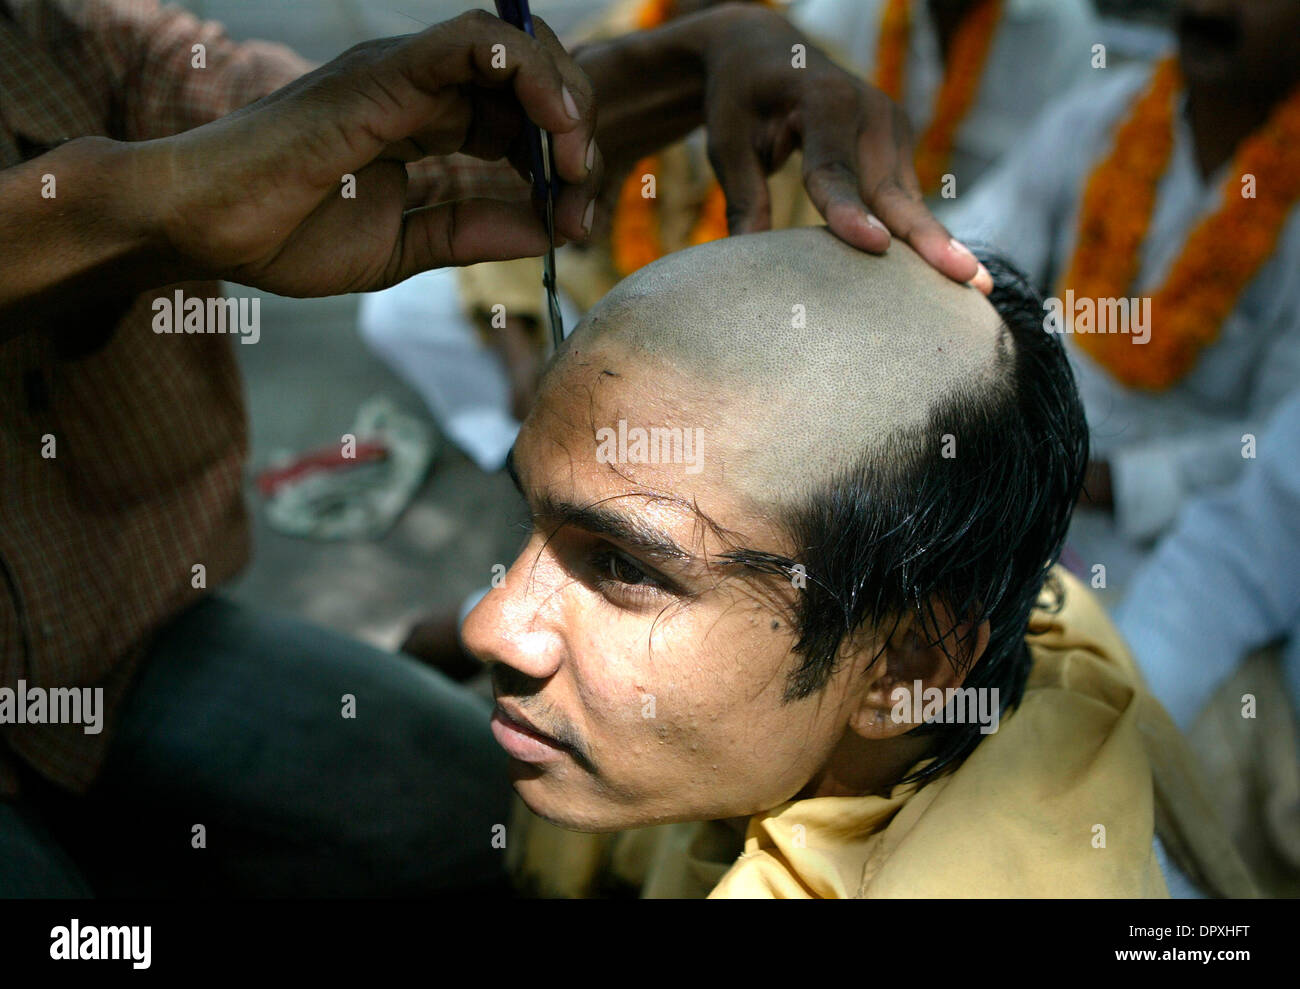 May 04, 2009 - New Delhi, India - An activist of 'All India Valmiki Mahapanchayat' shaves his head during a demonstration against inability of the Government and various political parties to pass a 'Inclusive of Votership' in their election manifesto. (Credit Image: © M Lakshman/M. Lakshman/ZUMA Press) Stock Photo